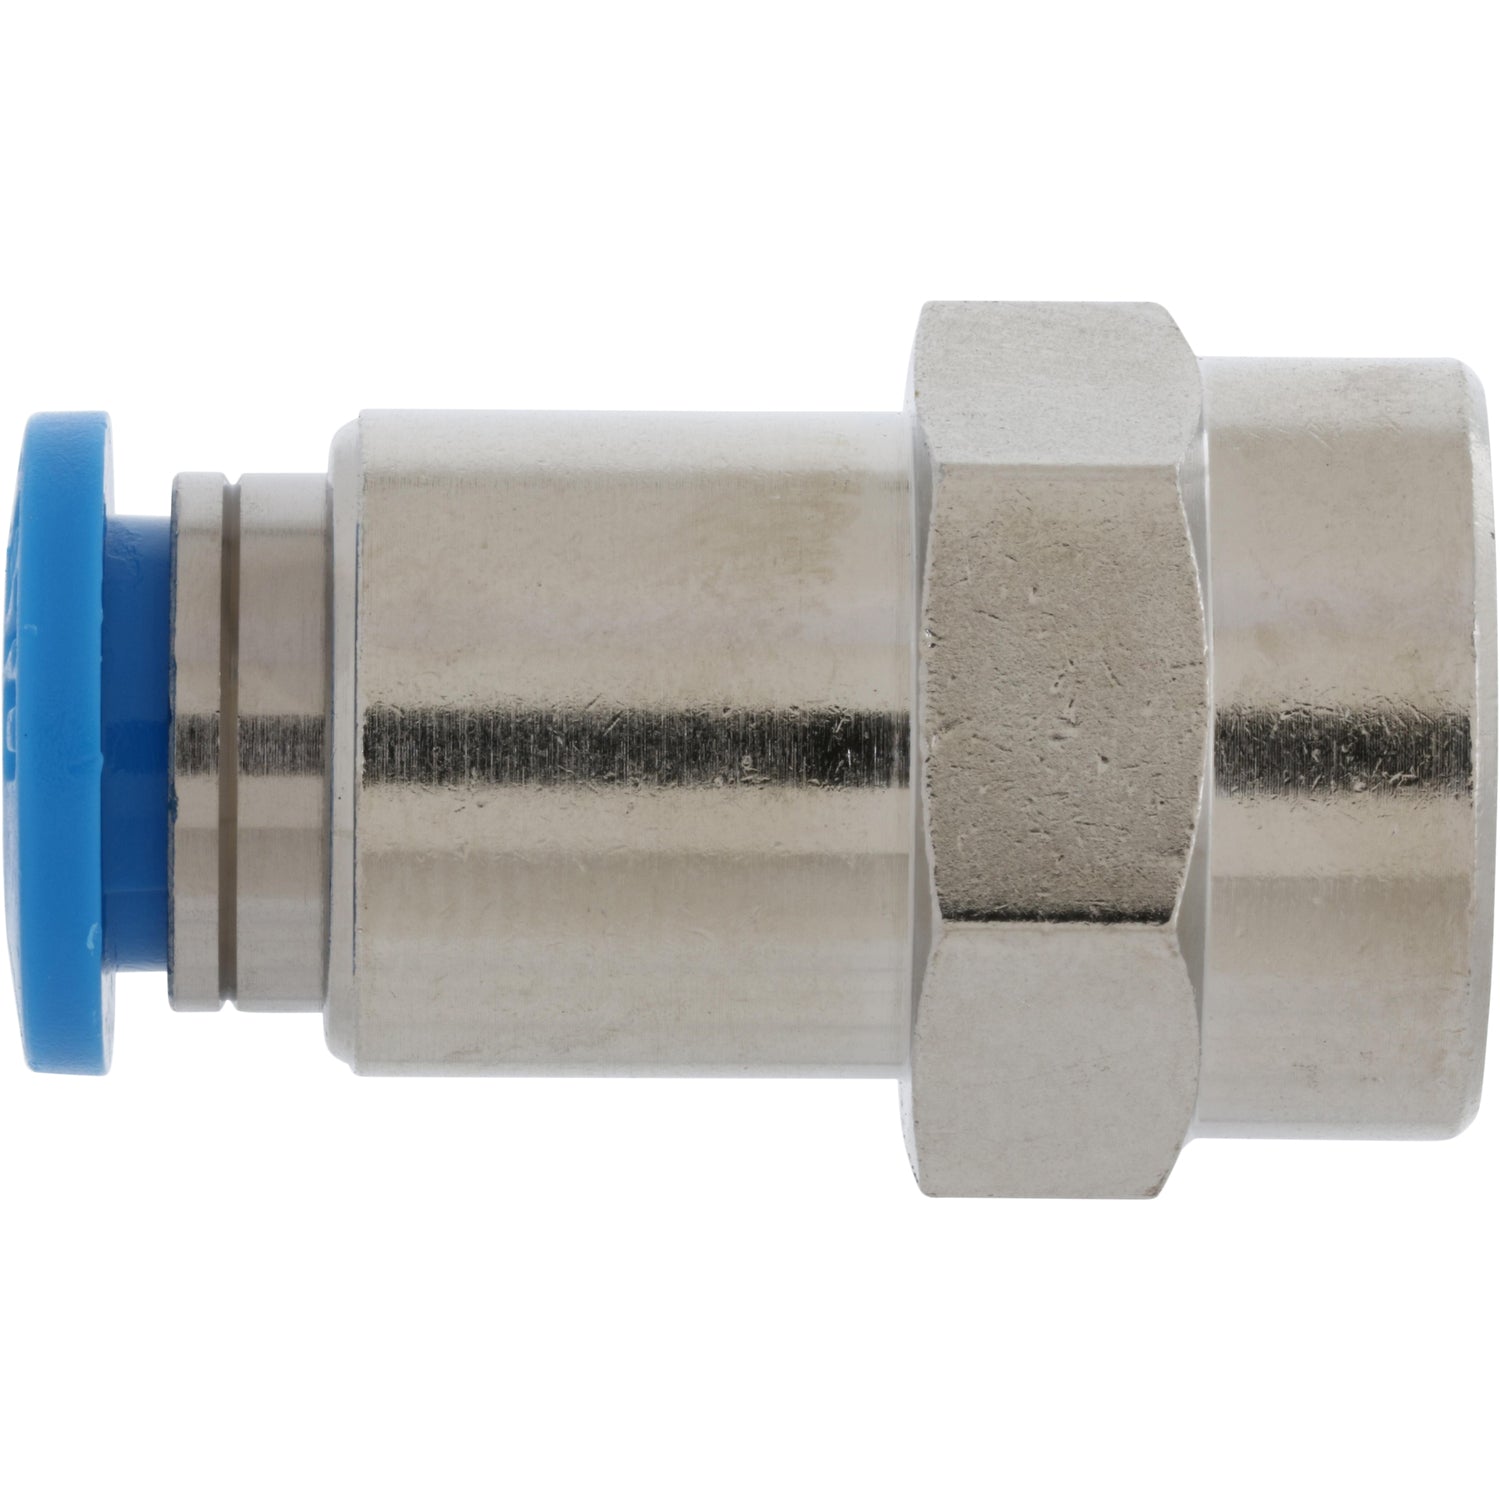 Push-in Fitting with blue press connect collar and exposed threads. Part shown on white background.